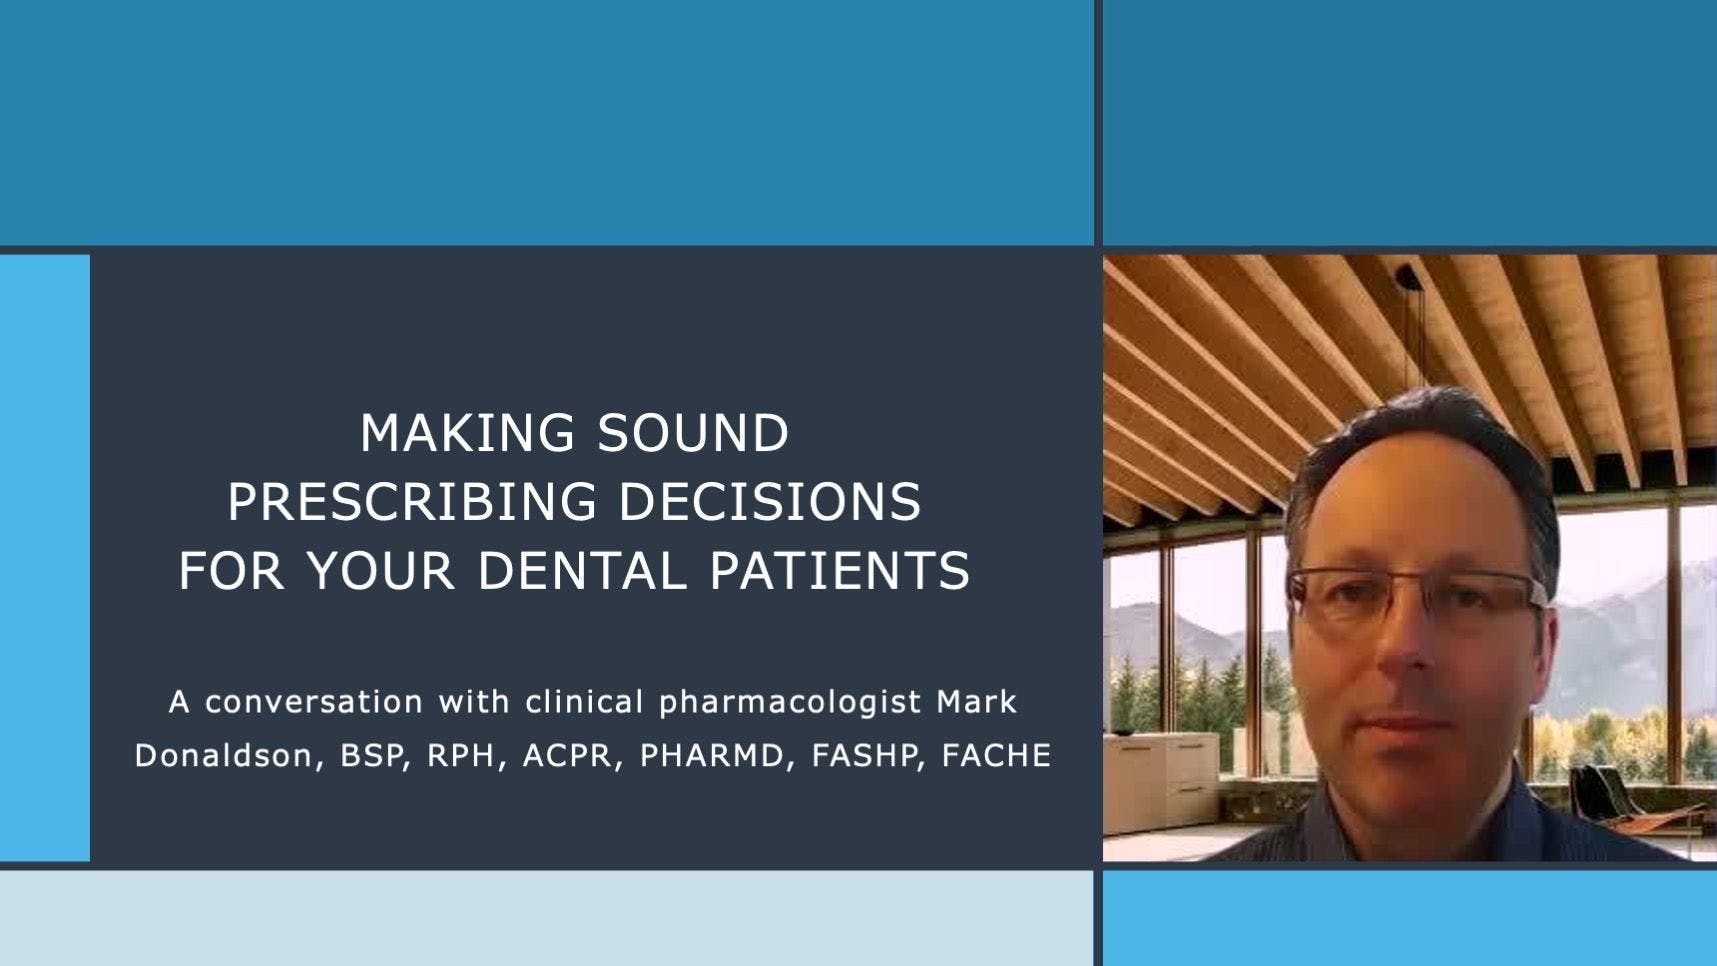 Making Sound Prescribing Decisions for Your Dental Patients